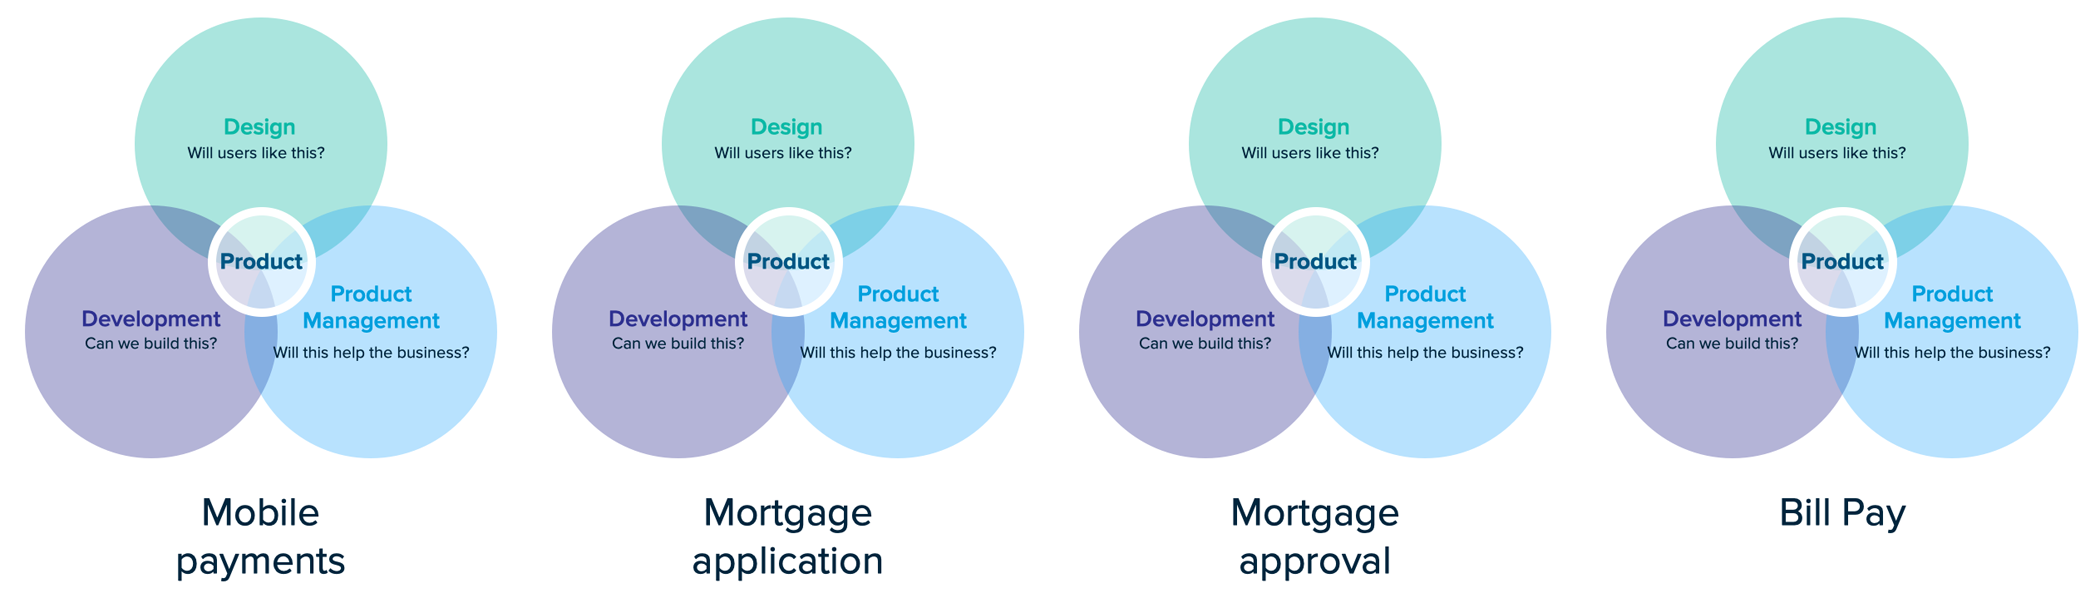 Examples of product teams by application and service.